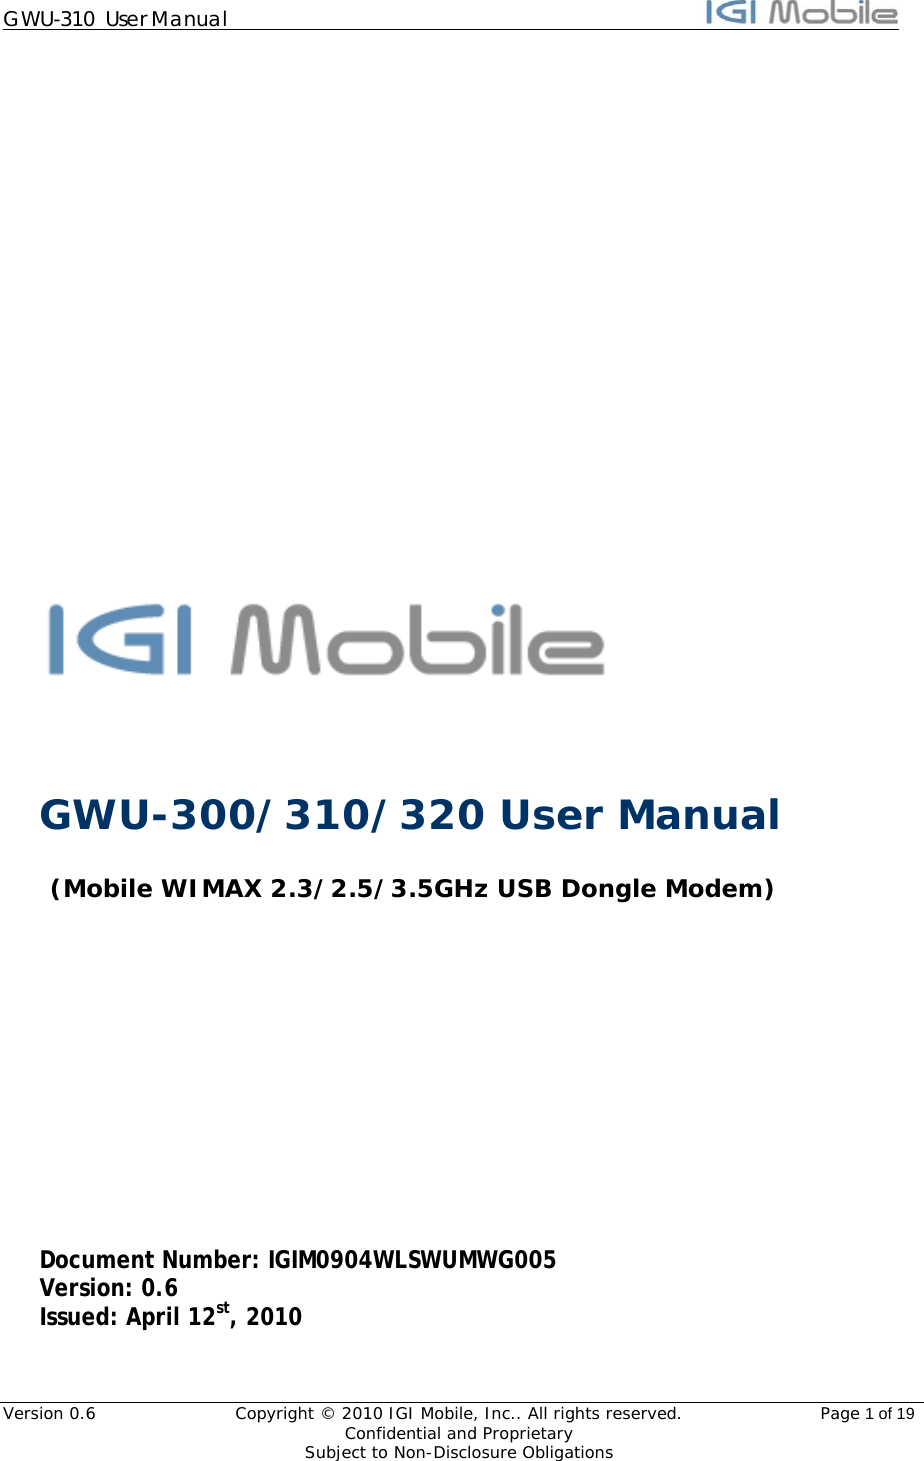 GWU-310  User Manual                                                                                                                    Version 0.6  Copyright © 2010 IGI Mobile, Inc.. All rights reserved.  Page 1 of 19  Confidential and Proprietary   Subject to Non-Disclosure Obligations                     GWU-300/310/320 User Manual  (Mobile WIMAX 2.3/2.5/3.5GHz USB Dongle Modem)           Document Number: IGIM0904WLSWUMWG005 Version: 0.6 Issued: April 12st, 2010  